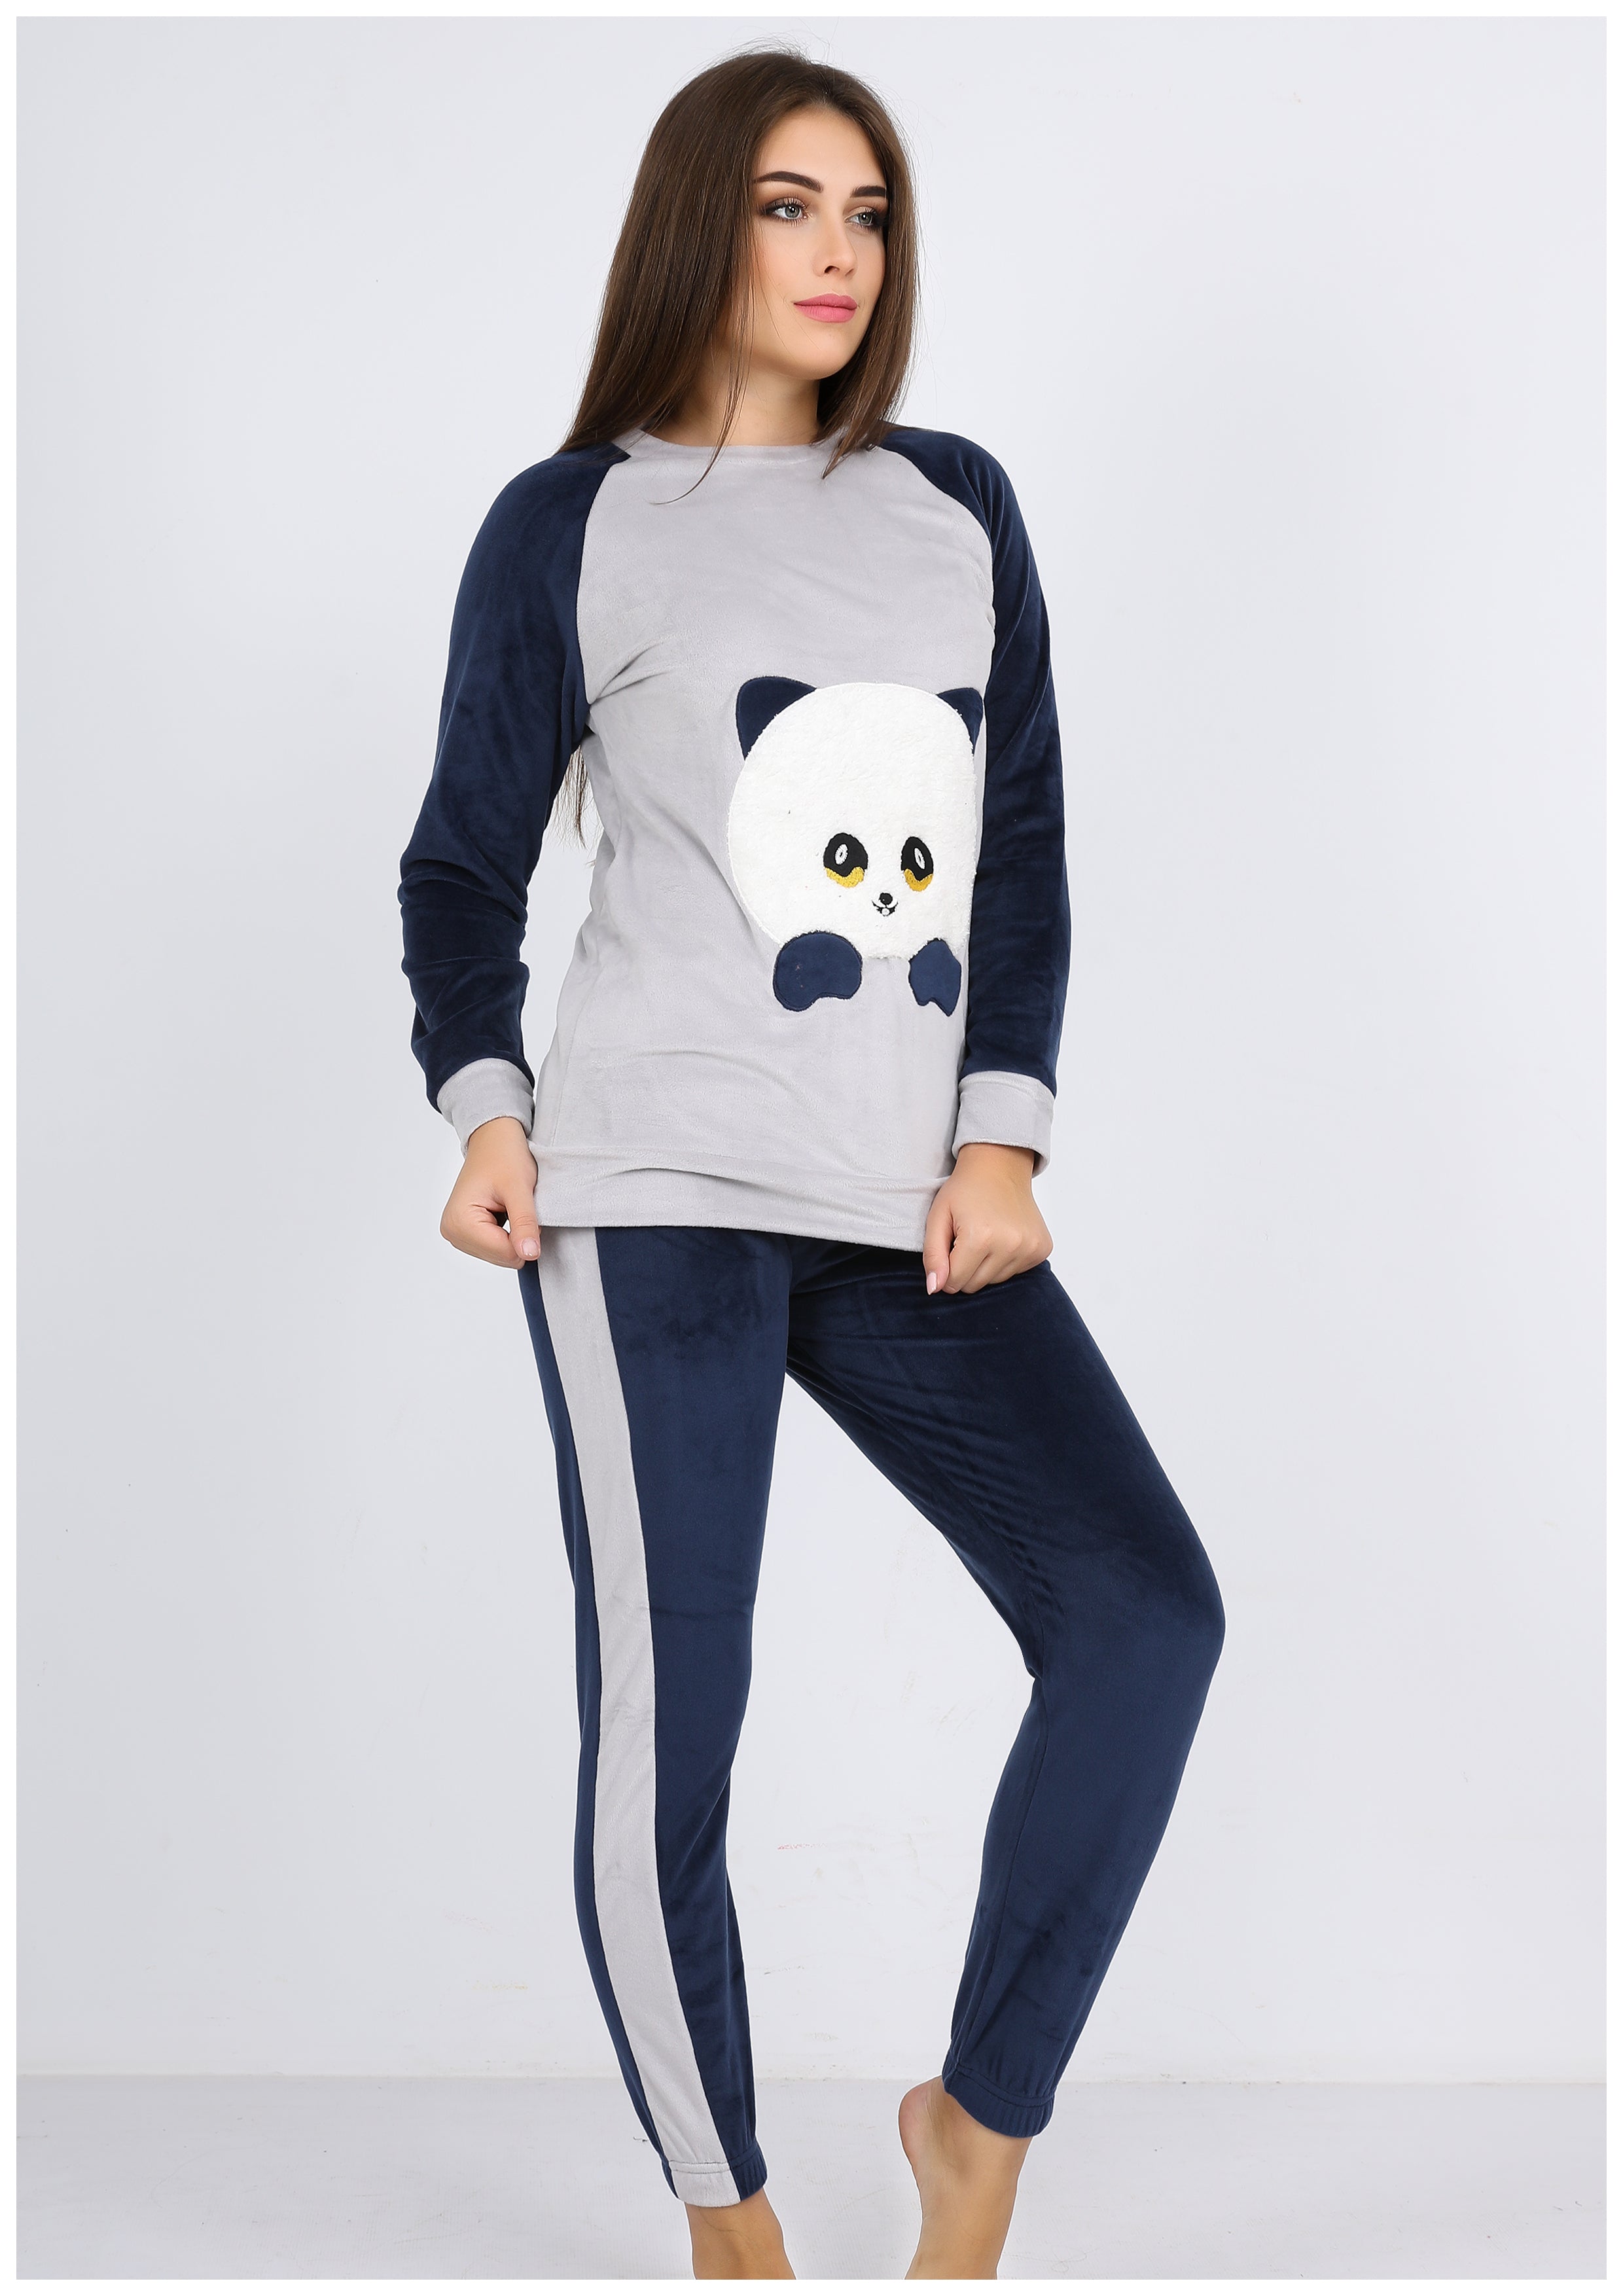 Light gray Heidi pajamas with double-sided lining and a panda print on the chest